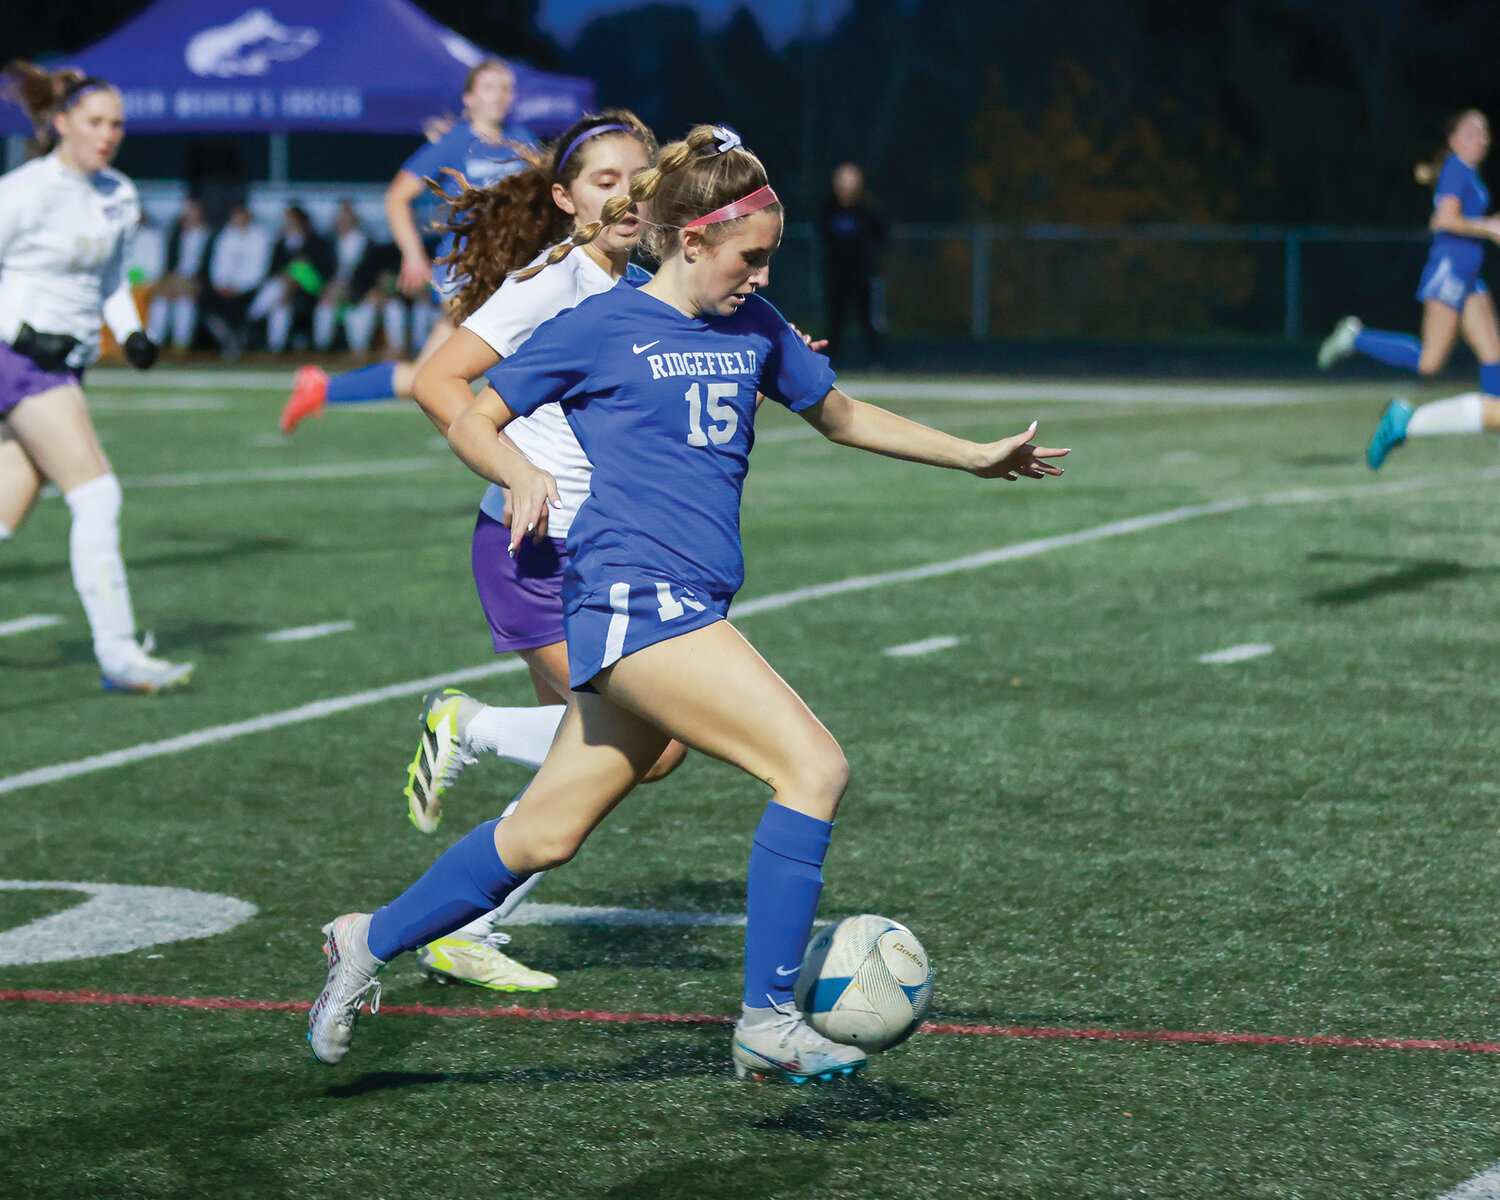 Ridgefield’s Victoria Lasch moves upfield with the ball against the Sequim Wolves in the first round of the 2A state playoffs on Wednesday, Nov. 8.